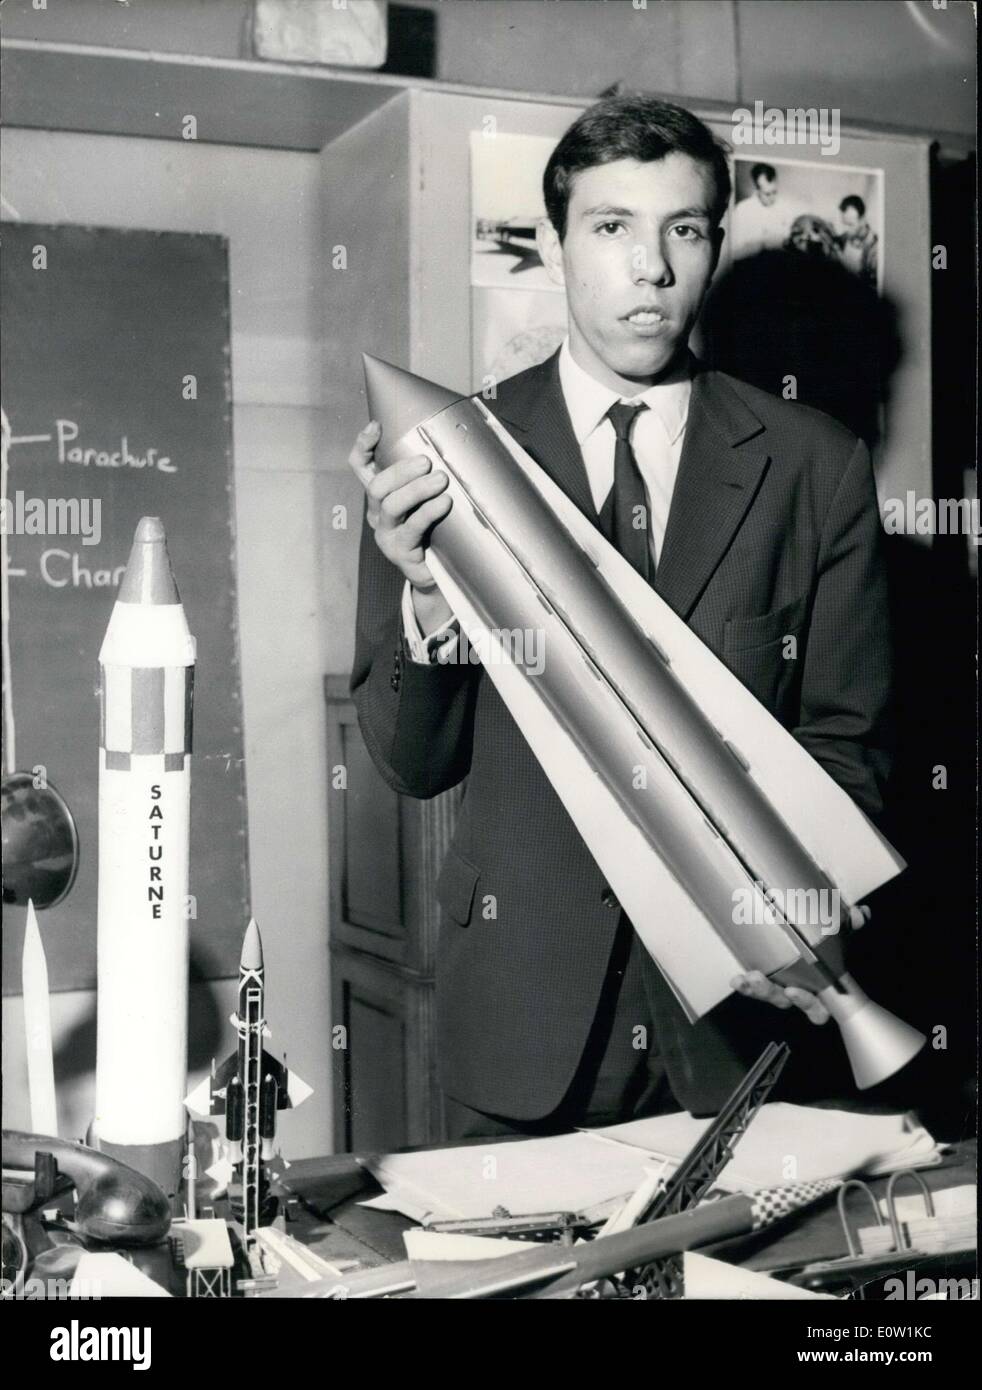 Nov. 18, 1960 - Teen-Agers construct Rocket:A Rocket reported to be able to ascend to nearly 45.000 feet has just been completed by a group of Paris students, all Teen-Agers.The Rocket will be experimented next month.Photo shows Philippe Arnal, 18, President of the ''Young Rockets'' club who participated in the contrsuction demonstrating the rocket to the press this afternoon. Stock Photo